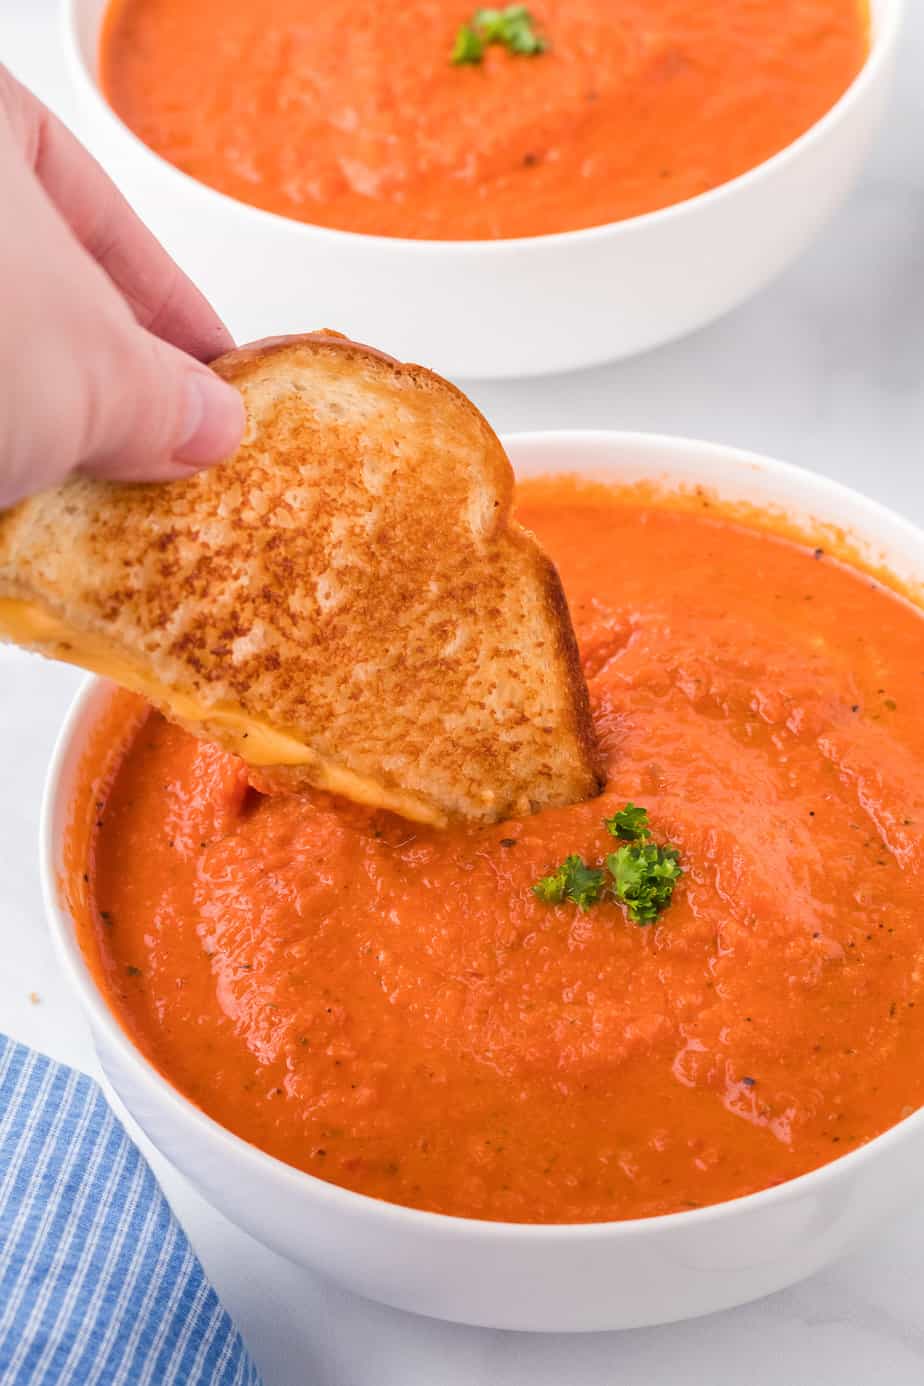 Dipping a grilled cheese sandwich into a bowl of tomato soup from the side with a second bowl in the background.